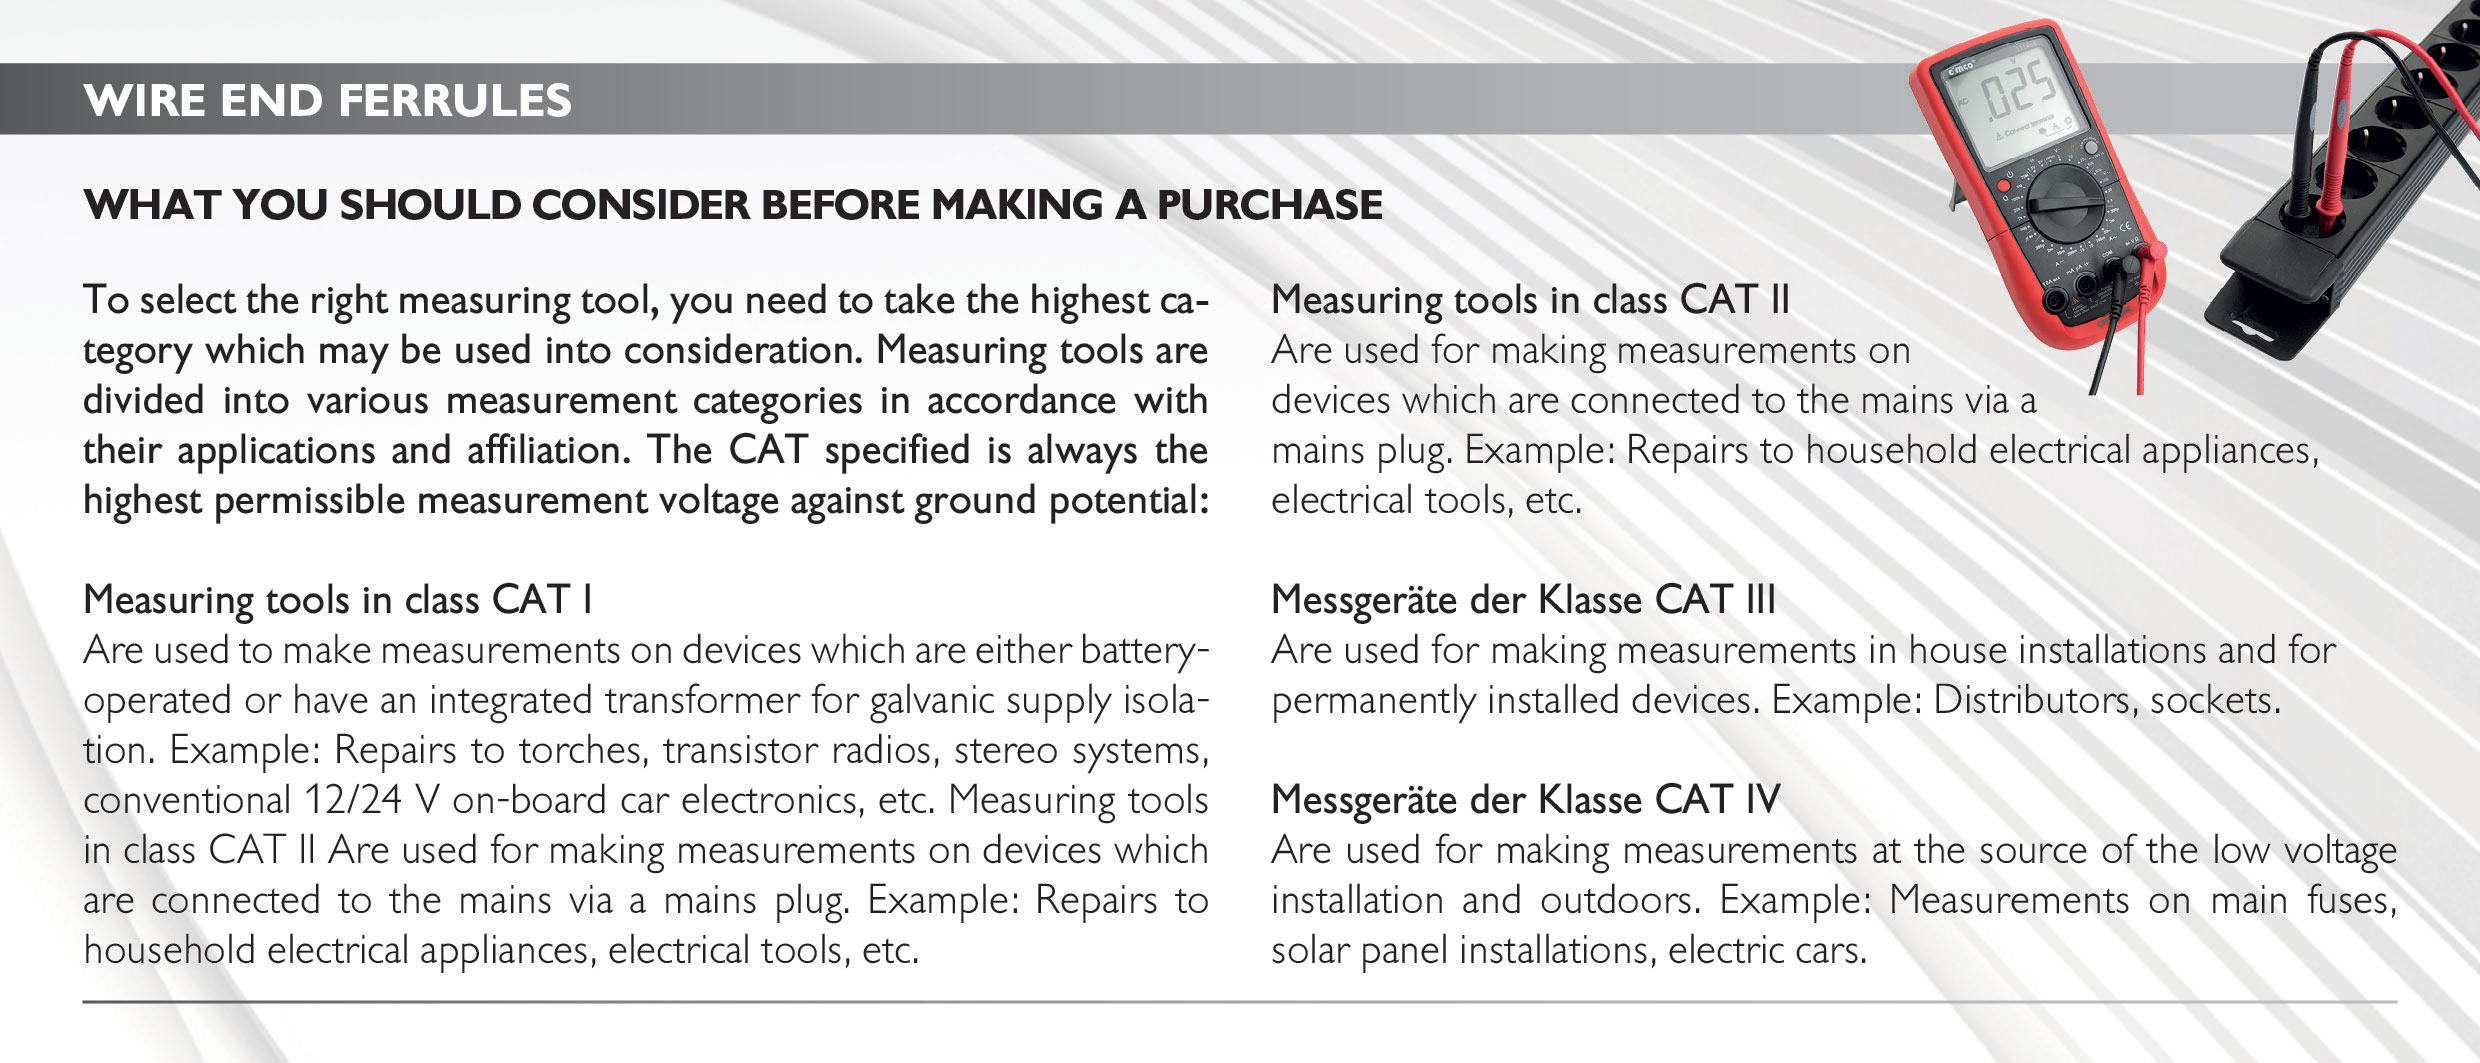 wire end ferrules
What you should consider before making a purchase
To select the right measuring tool, you need to take the highest category which may be used into consideration. Measuring tools are divided into various measurement categories in accordance with their applications and affiliation. The CAT specified is always the highest permissible measurement voltage against ground potential:
Measuring tools in class CAT I
Are used to make measurements on devices which are either battery-operated or have an integrated transformer for galvanic supply isolation. Example: Repairs to torches, transistor radios, stereo systems, conventional 12/24 V on-board car electronics, etc. Measuring tools in class CAT II Are used for making measurements on devices which are connected to the mains via a mains plug. Example: Repairs to household electrical appliances, electrical tools, etc.
Measuring tools in class CAT II
Are used for making measurements on devices which are connected to the mains via a mains plug. Example: Repairs to household electrical appliances, electrical tools, etc.
Messgeräte der Klasse CAT III
Are used for making measurements in house installations and for
permanently installed devices. Example: Distributors, sockets.
Messgeräte der Klasse CAT IV
Are used for making measurements at the source of the low voltage installation and outdoors. Example: Measurements on main fuses,
solar panel installations, electric cars. 